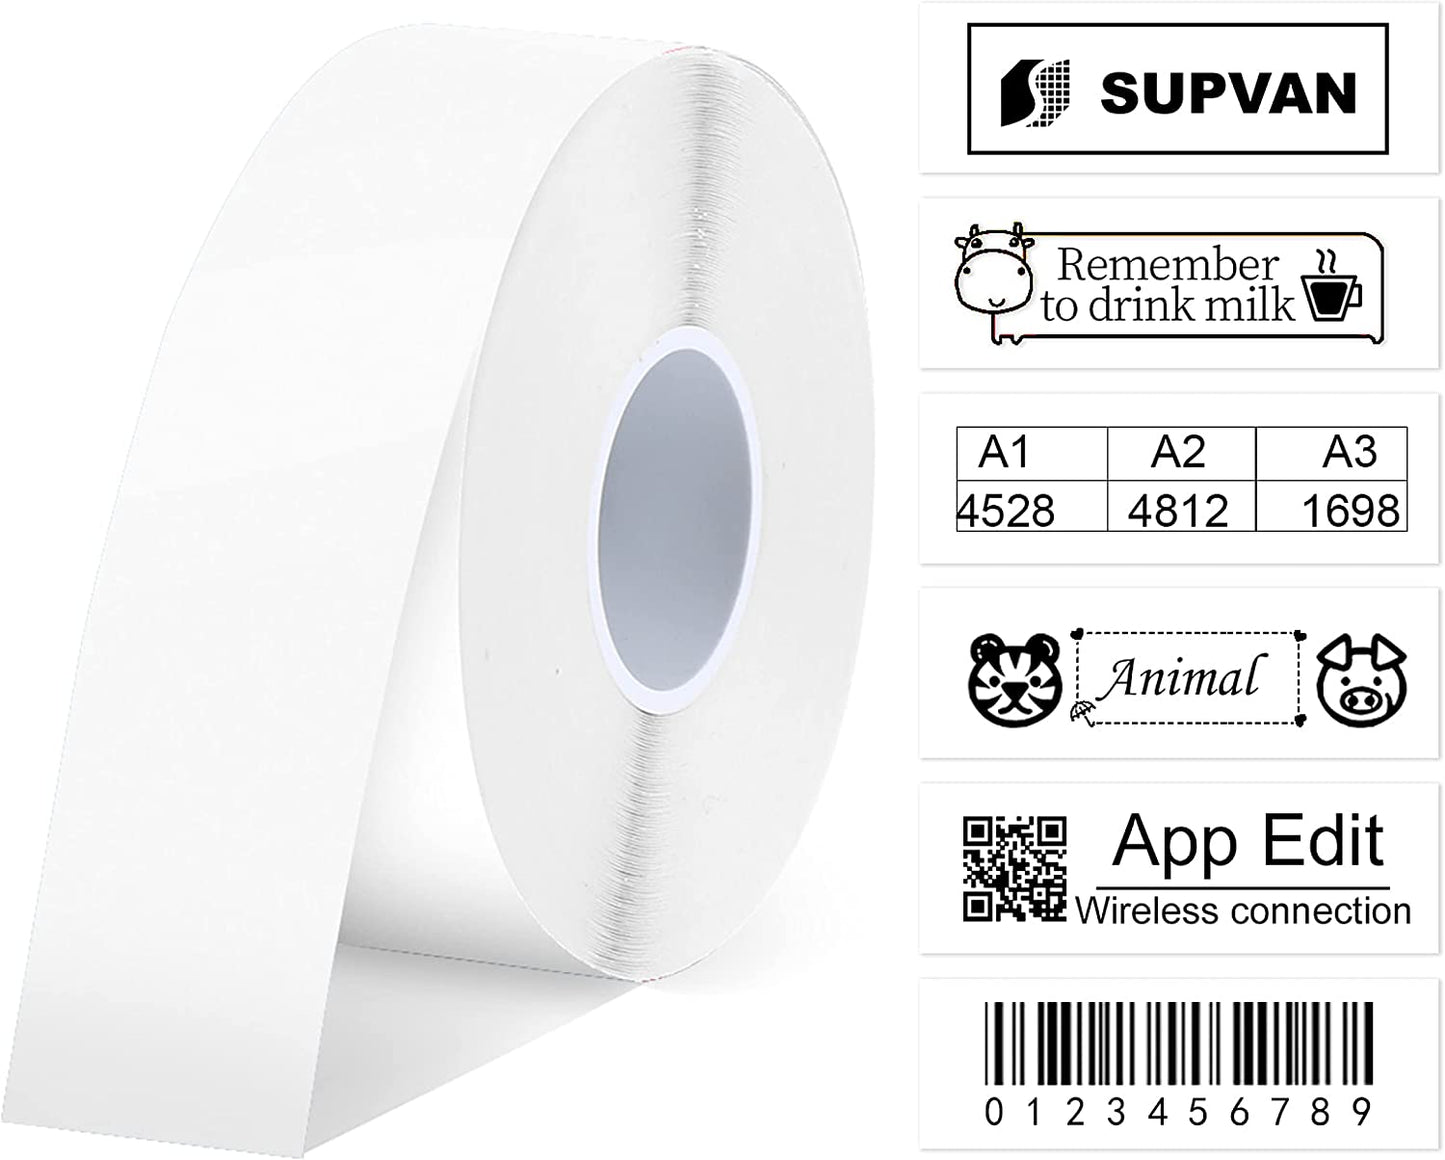 Transparent PET Clear Label Stickers Roll for Zebra Barcode